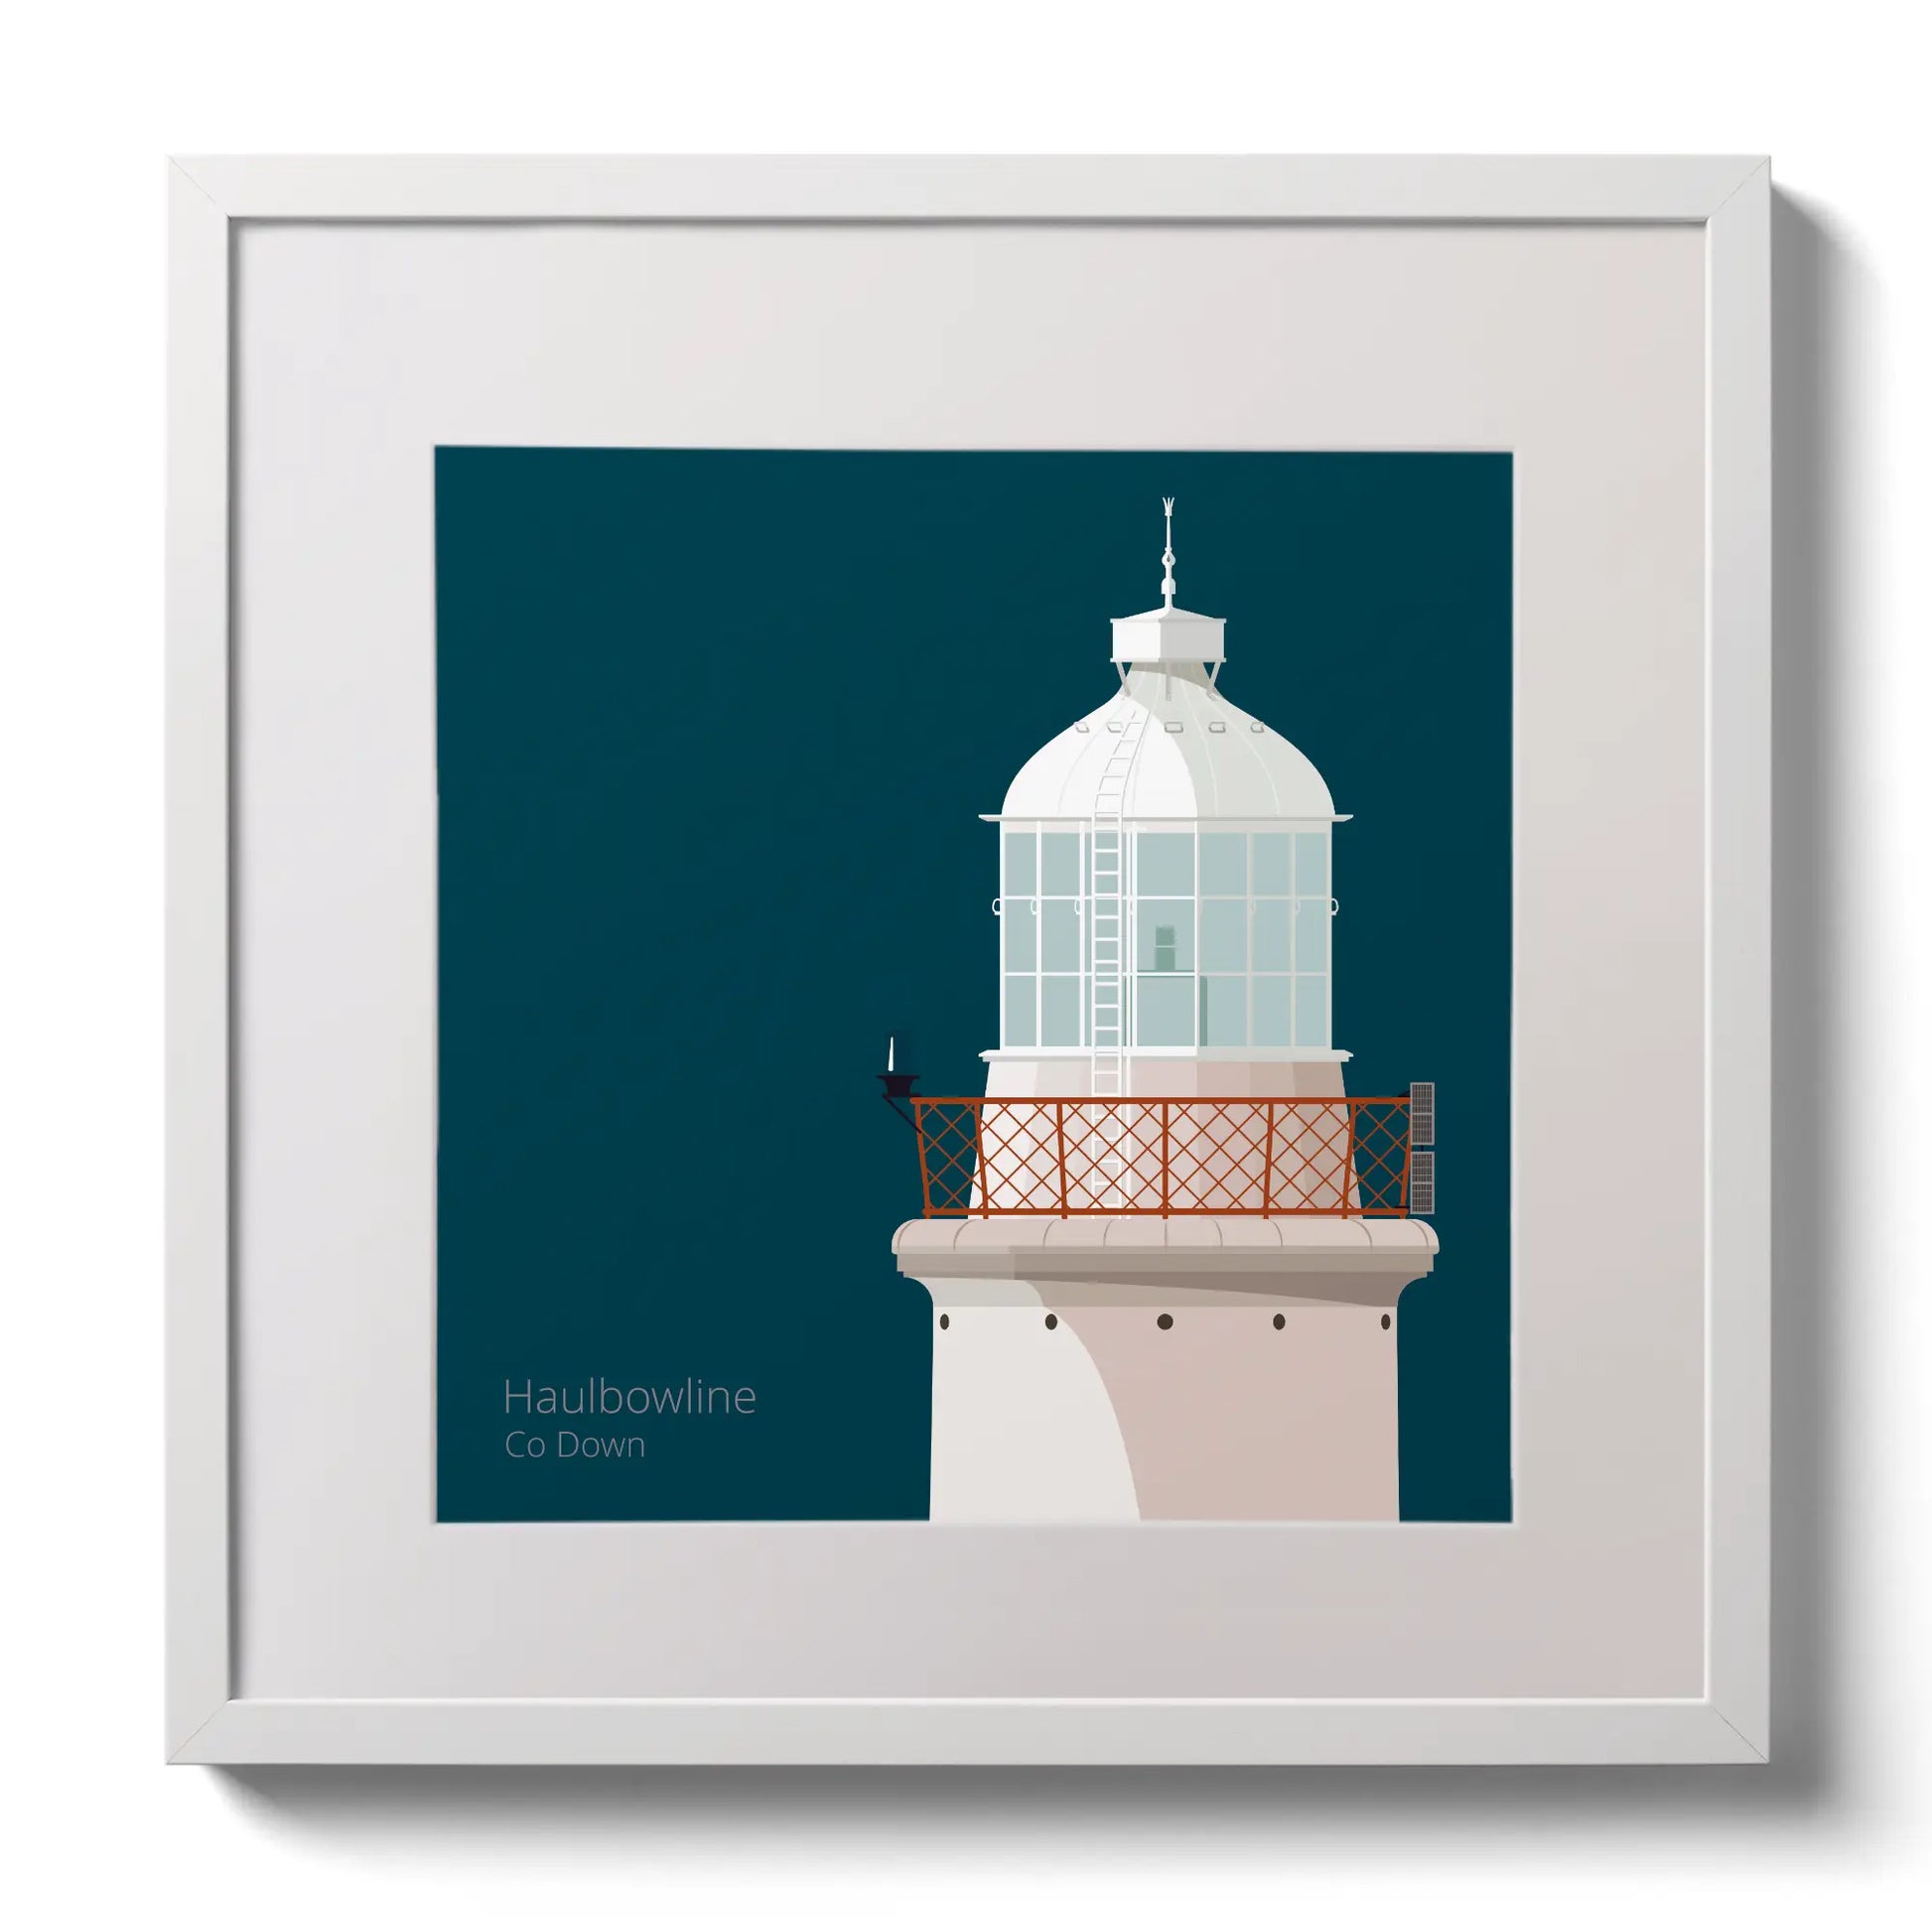 Illustration of Haulbowline lighthouse on a midnight blue background,  in a white square frame measuring 30x30cm.